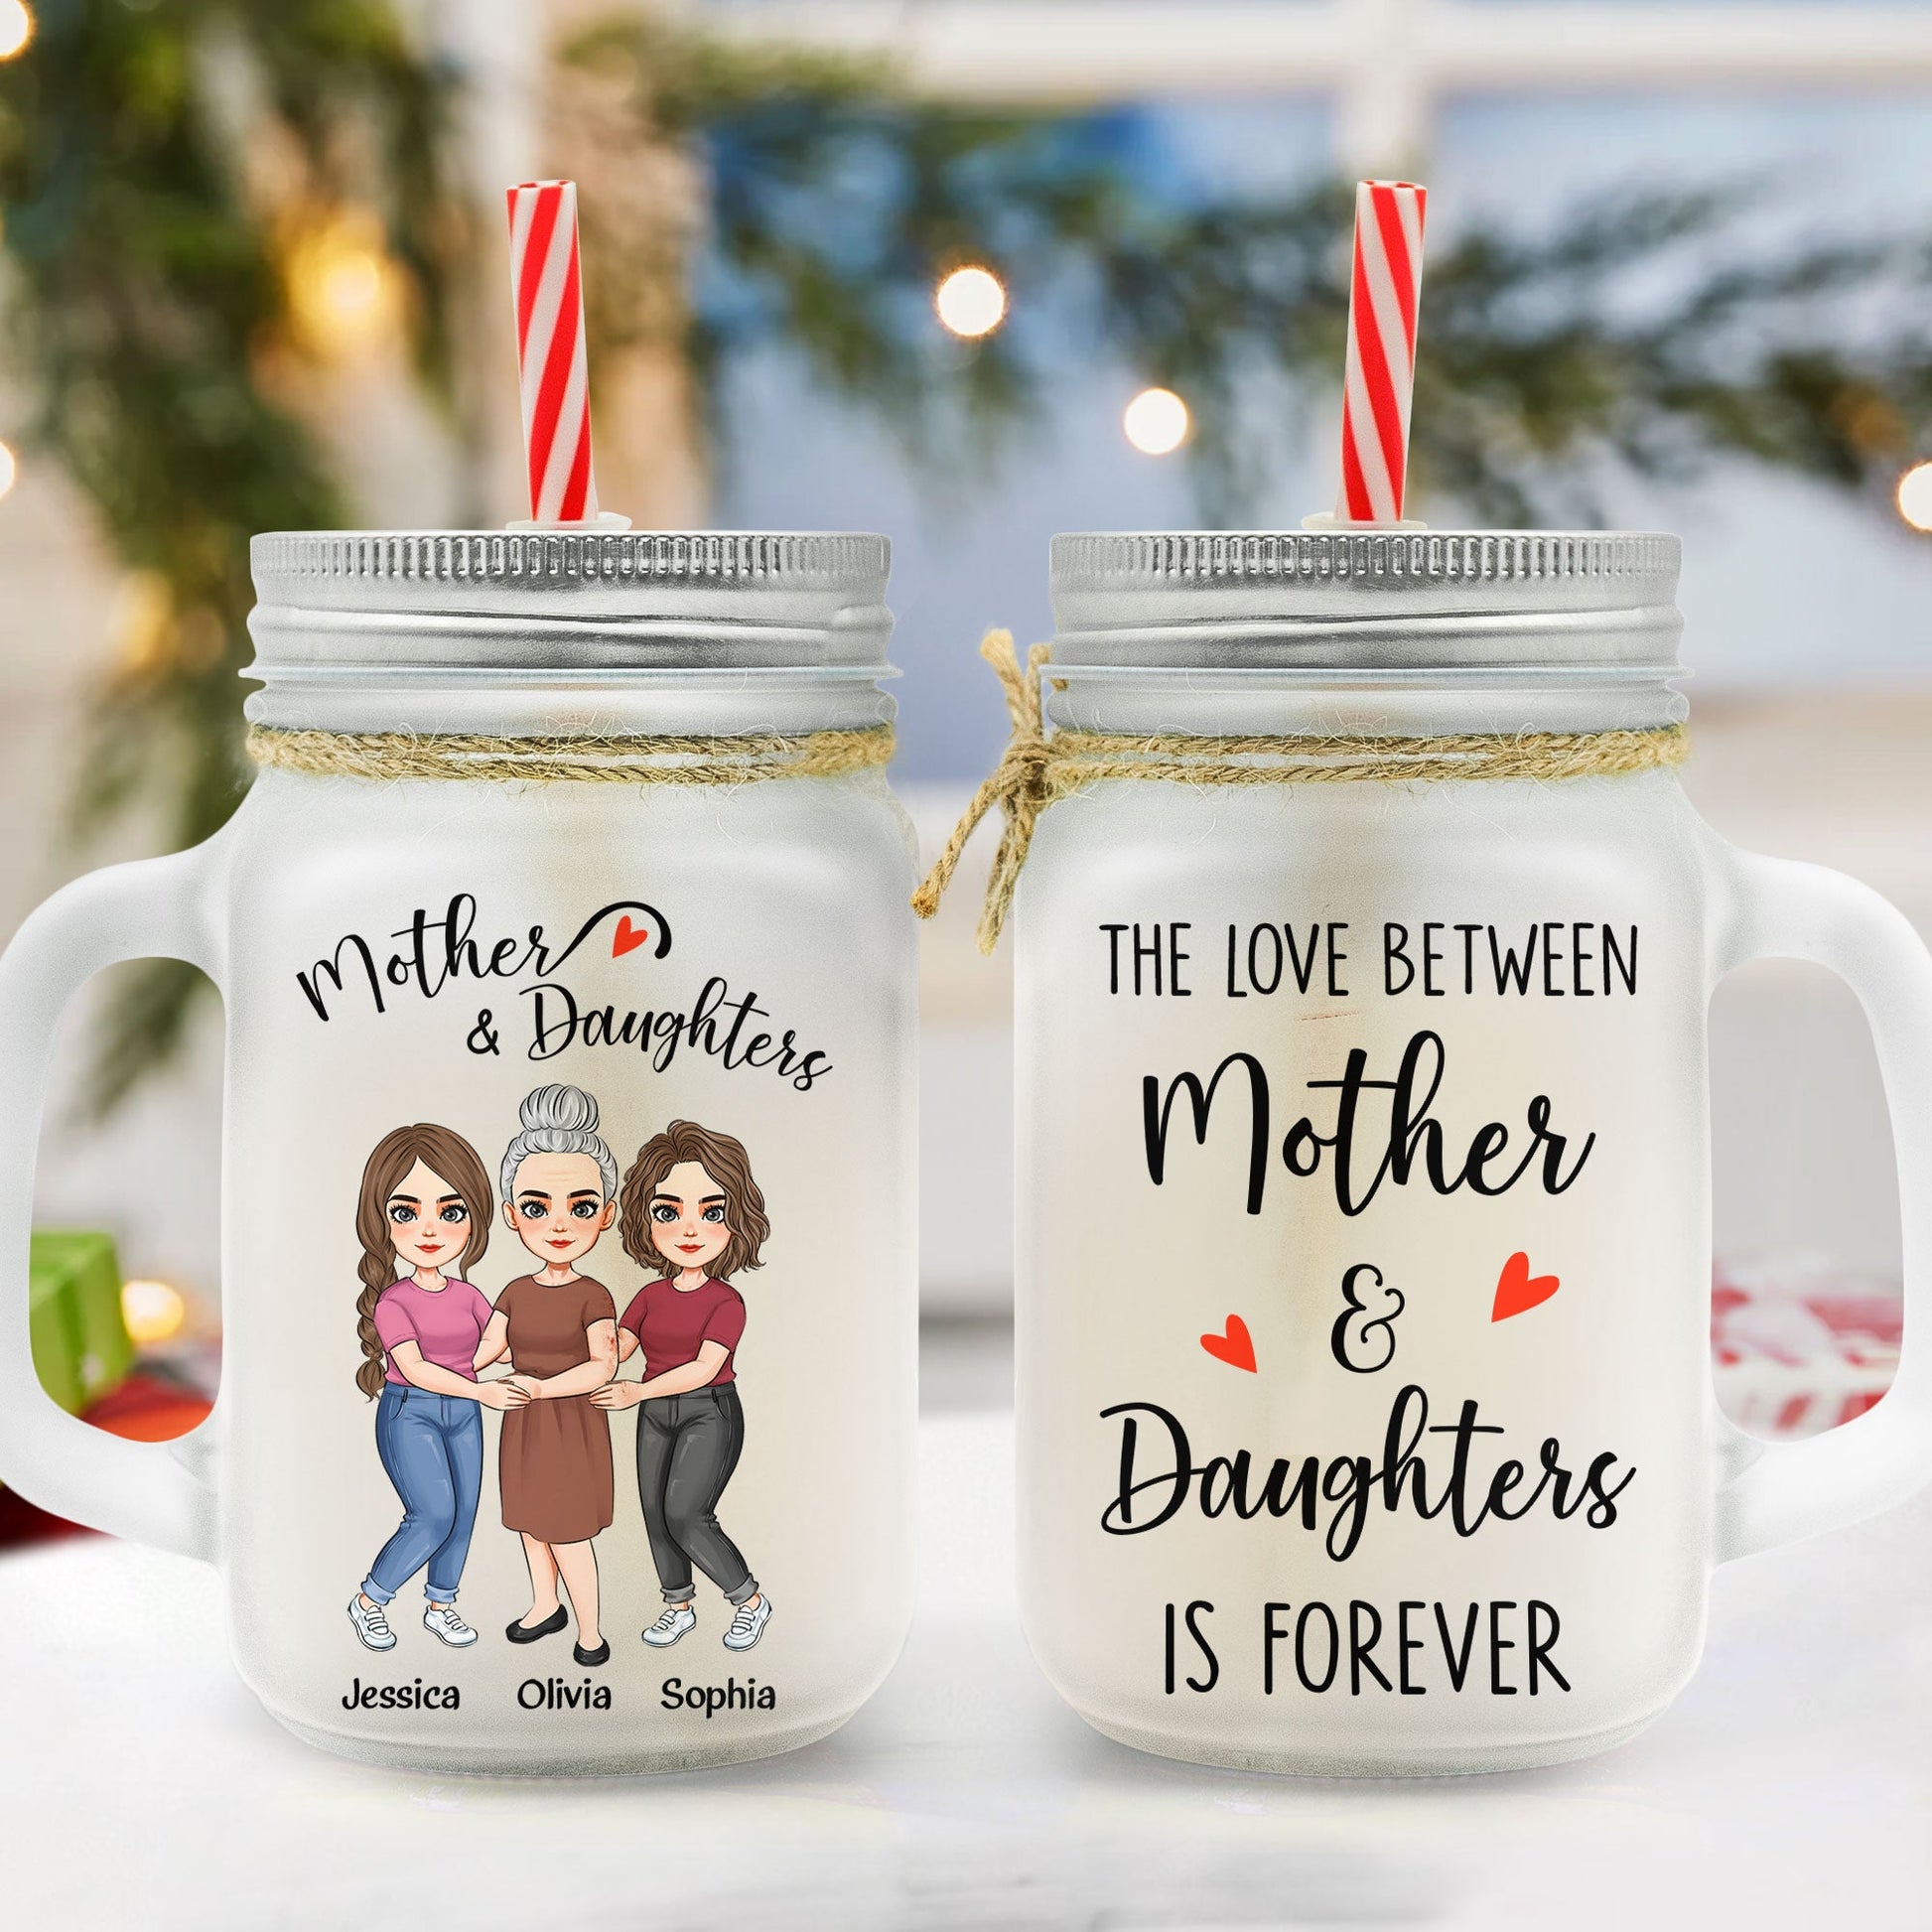 The last straw? The mother and daughter making these reusable